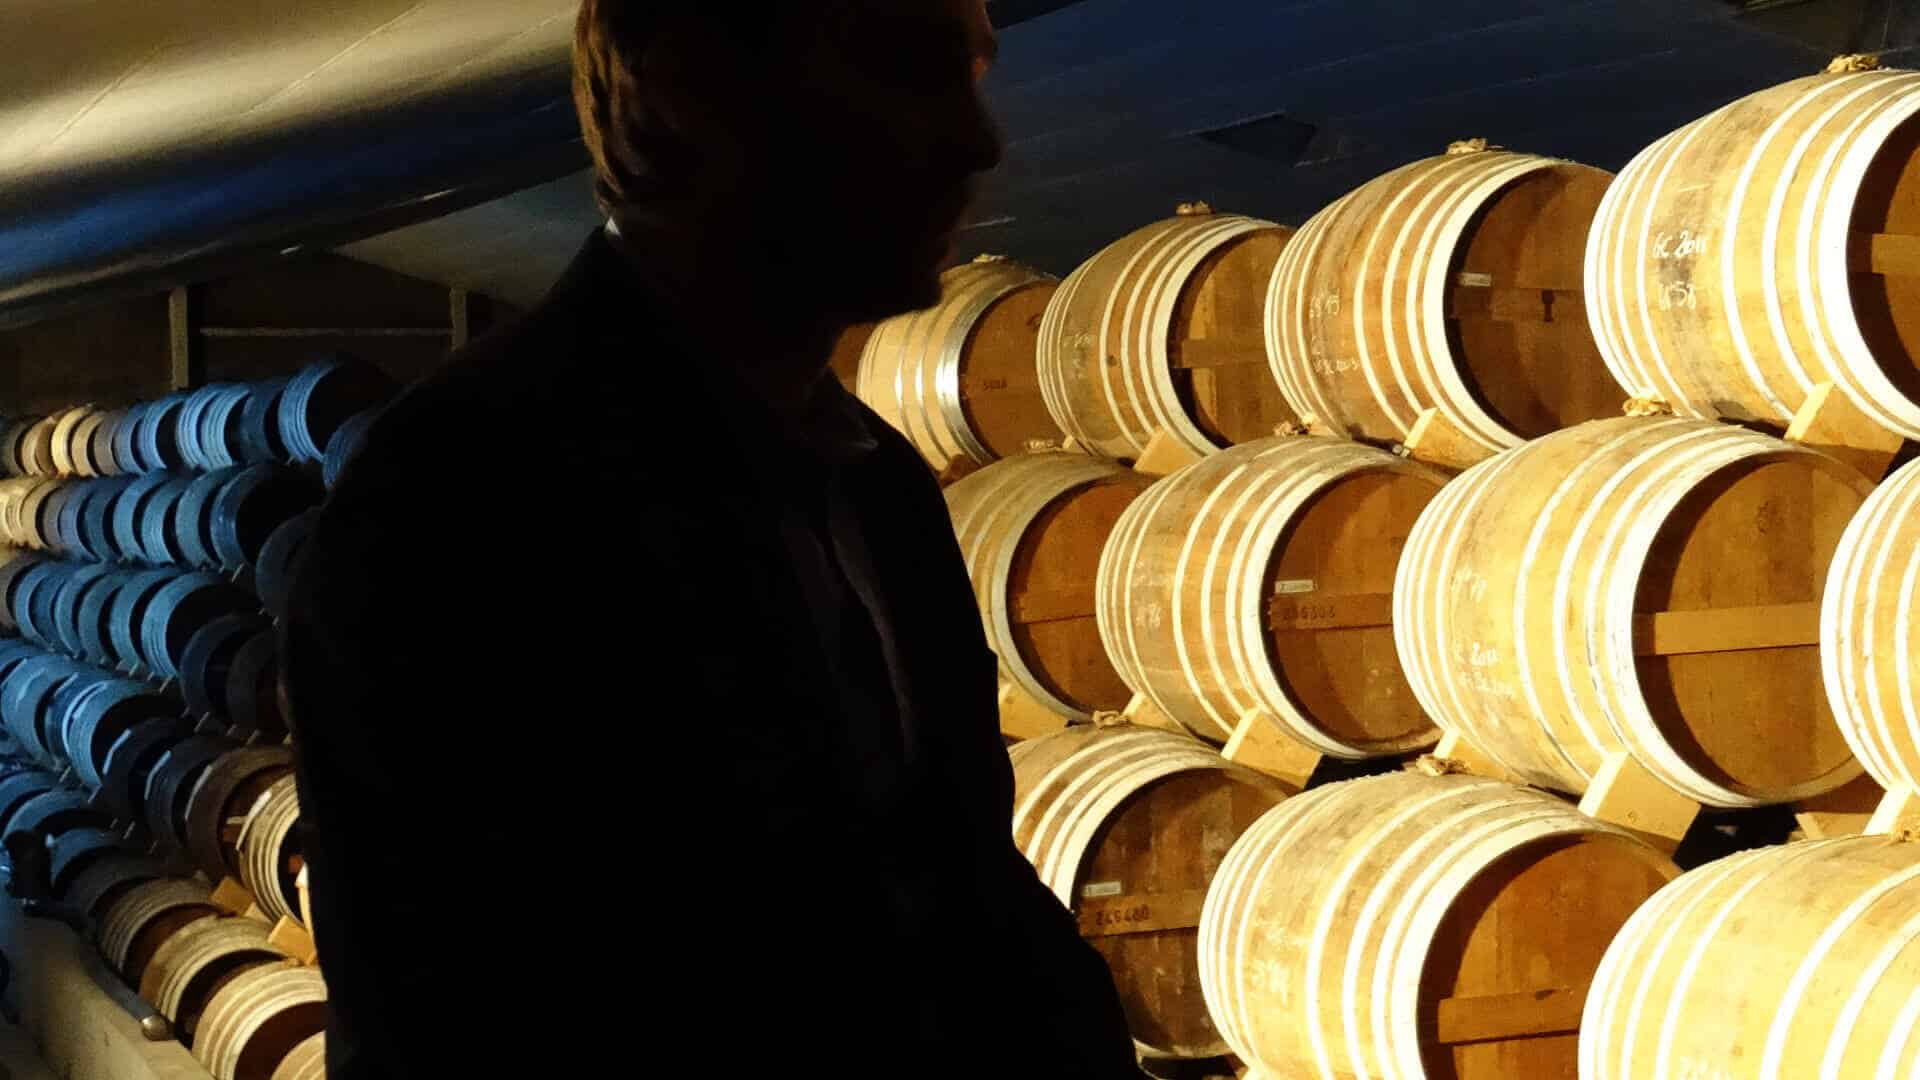 The cellar master in his domain, checking the aging of the brandies